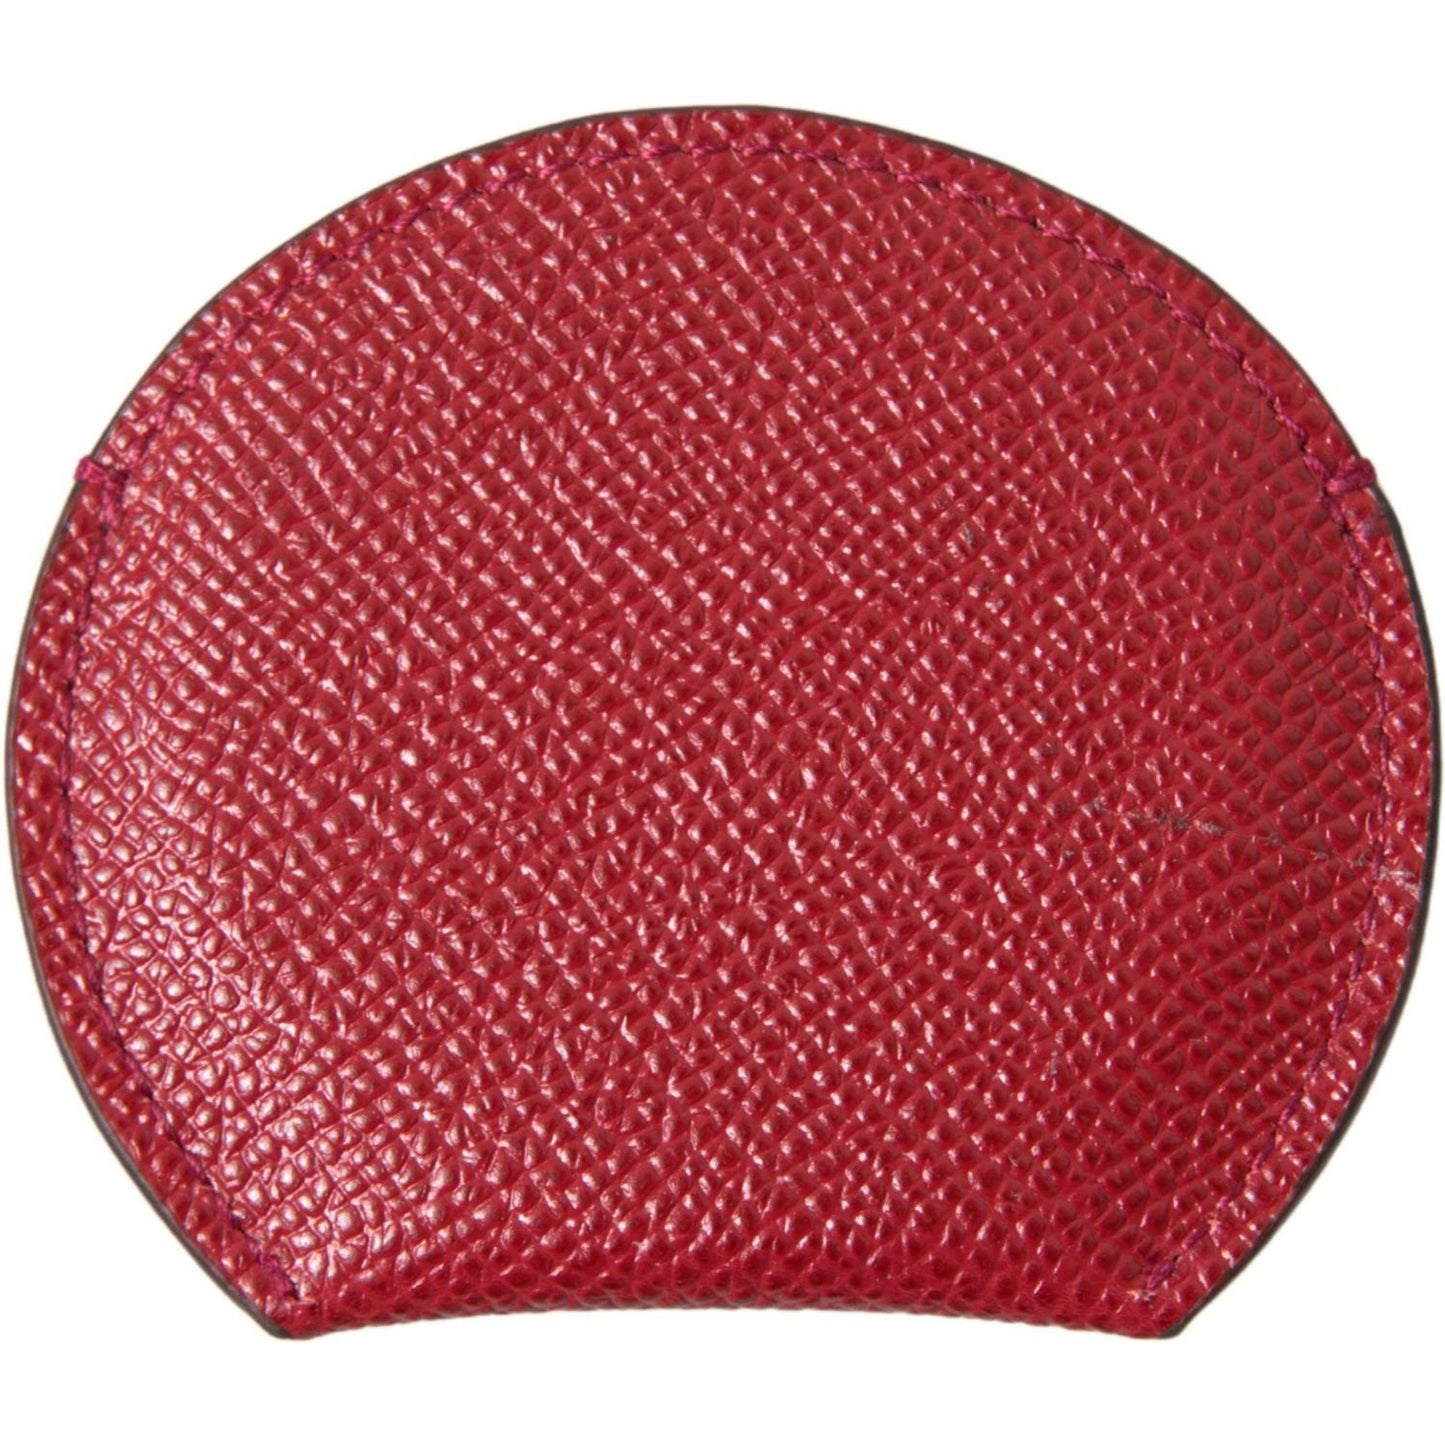 Dolce & Gabbana Chic Red Leather Hand Mirror Holder red-calfskin-leather-round-hand-mirror-holder 465A5010-scaled-06f986d4-362.jpg